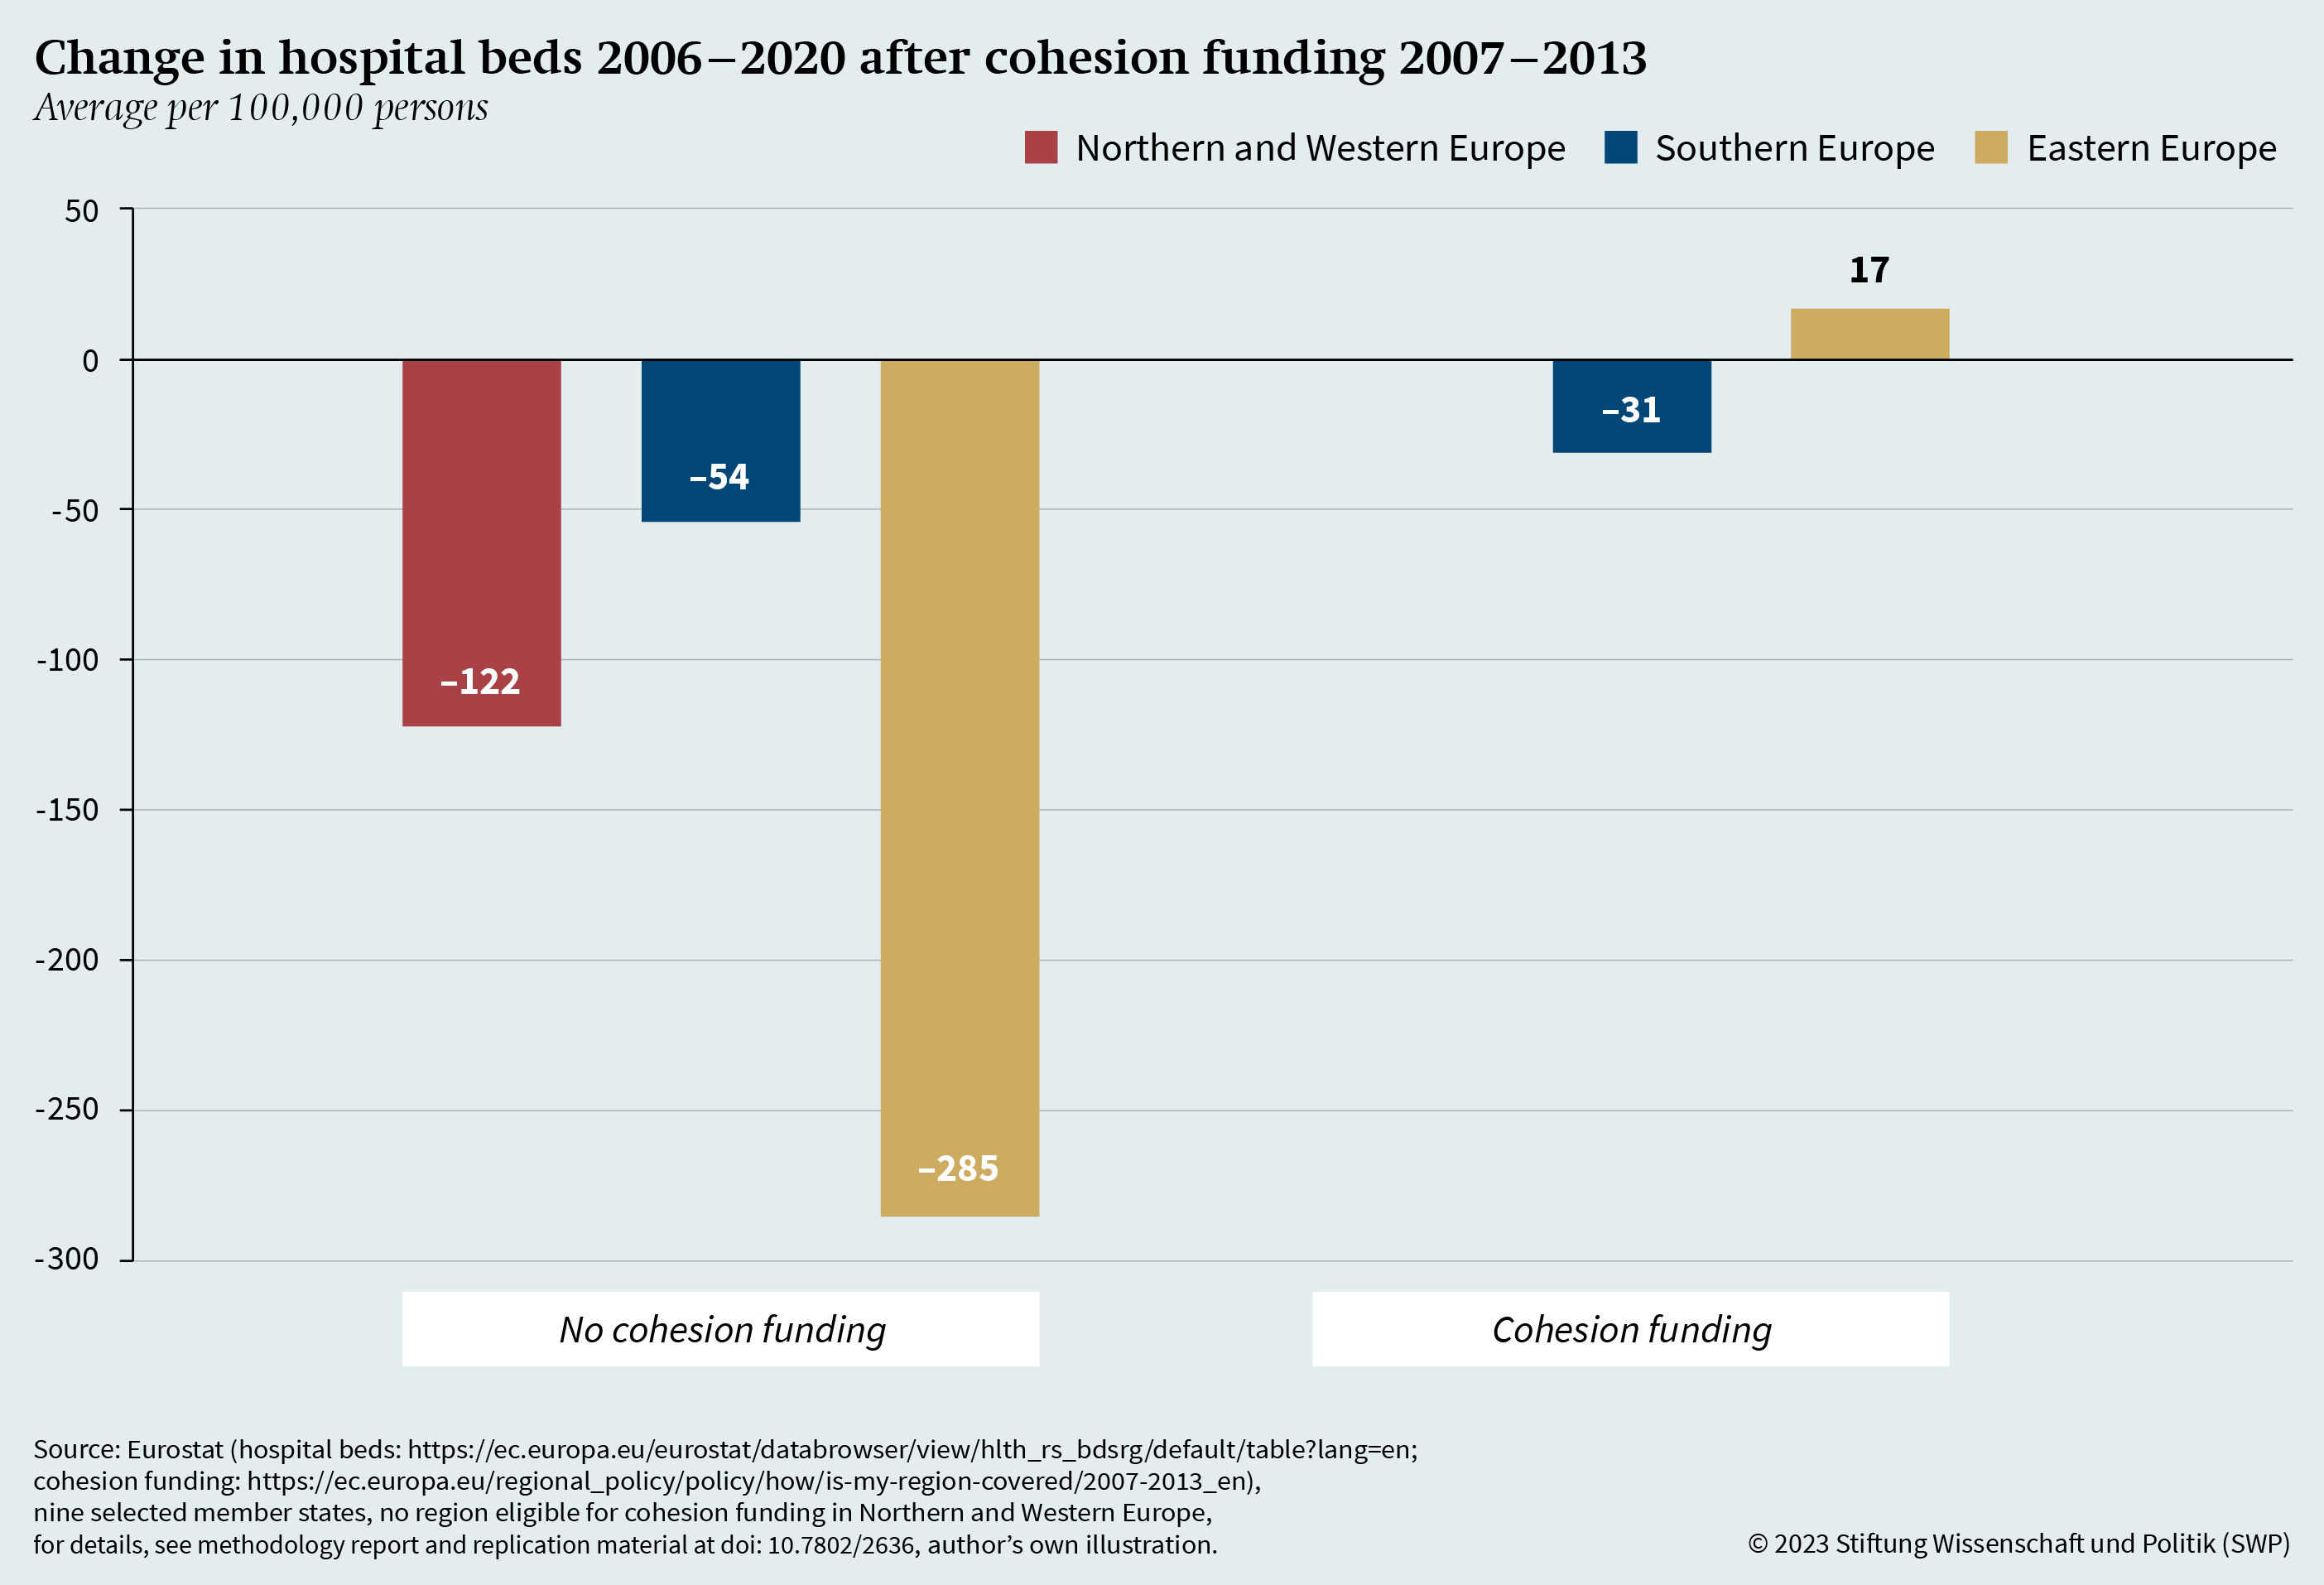 Figure 12: Change in hospital beds 2006–2020 after cohesion funding 2007–2013